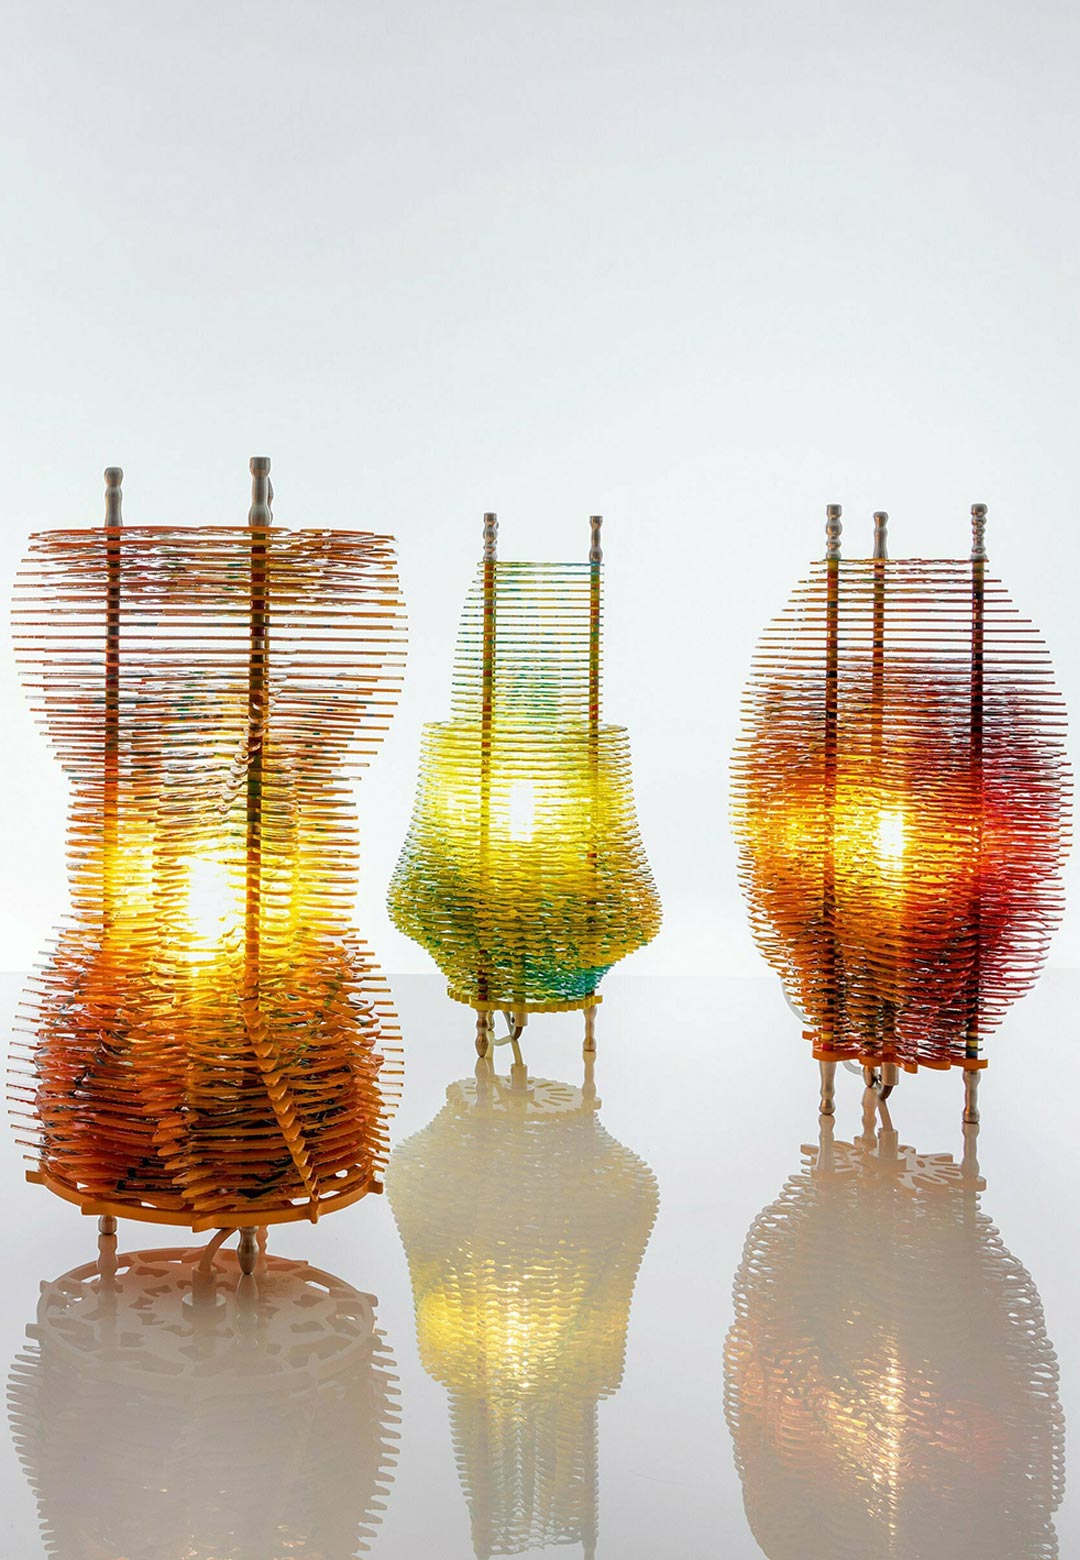 Taschen unveils a limited edition series of Jorge Pardo's illusive Brussels Lamps